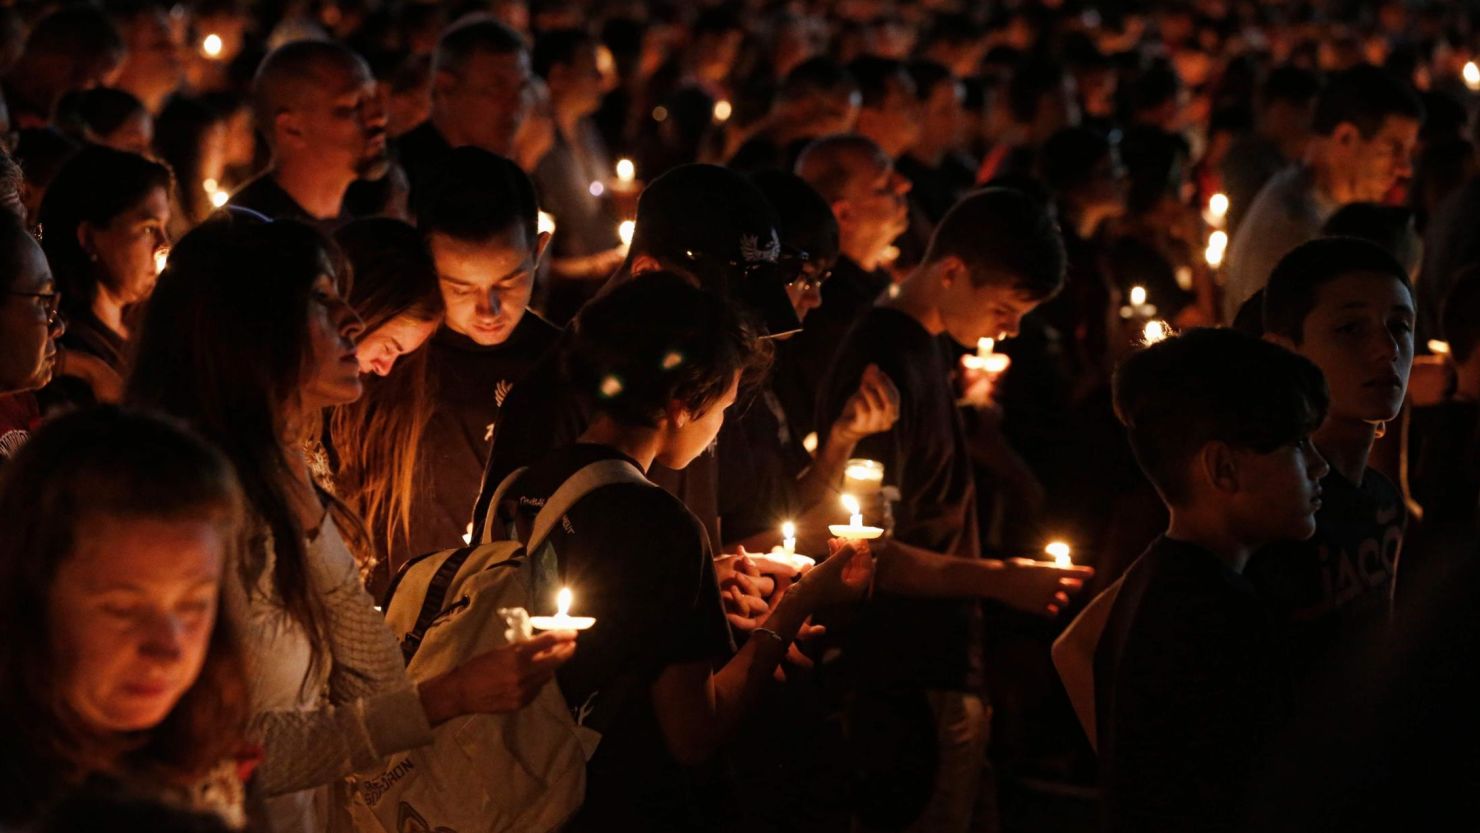 Thousands of mourners attend a candlelight vigil for victims of the Marjory Stoneman Douglas High School shooting in Parkland, Florida on February 15.